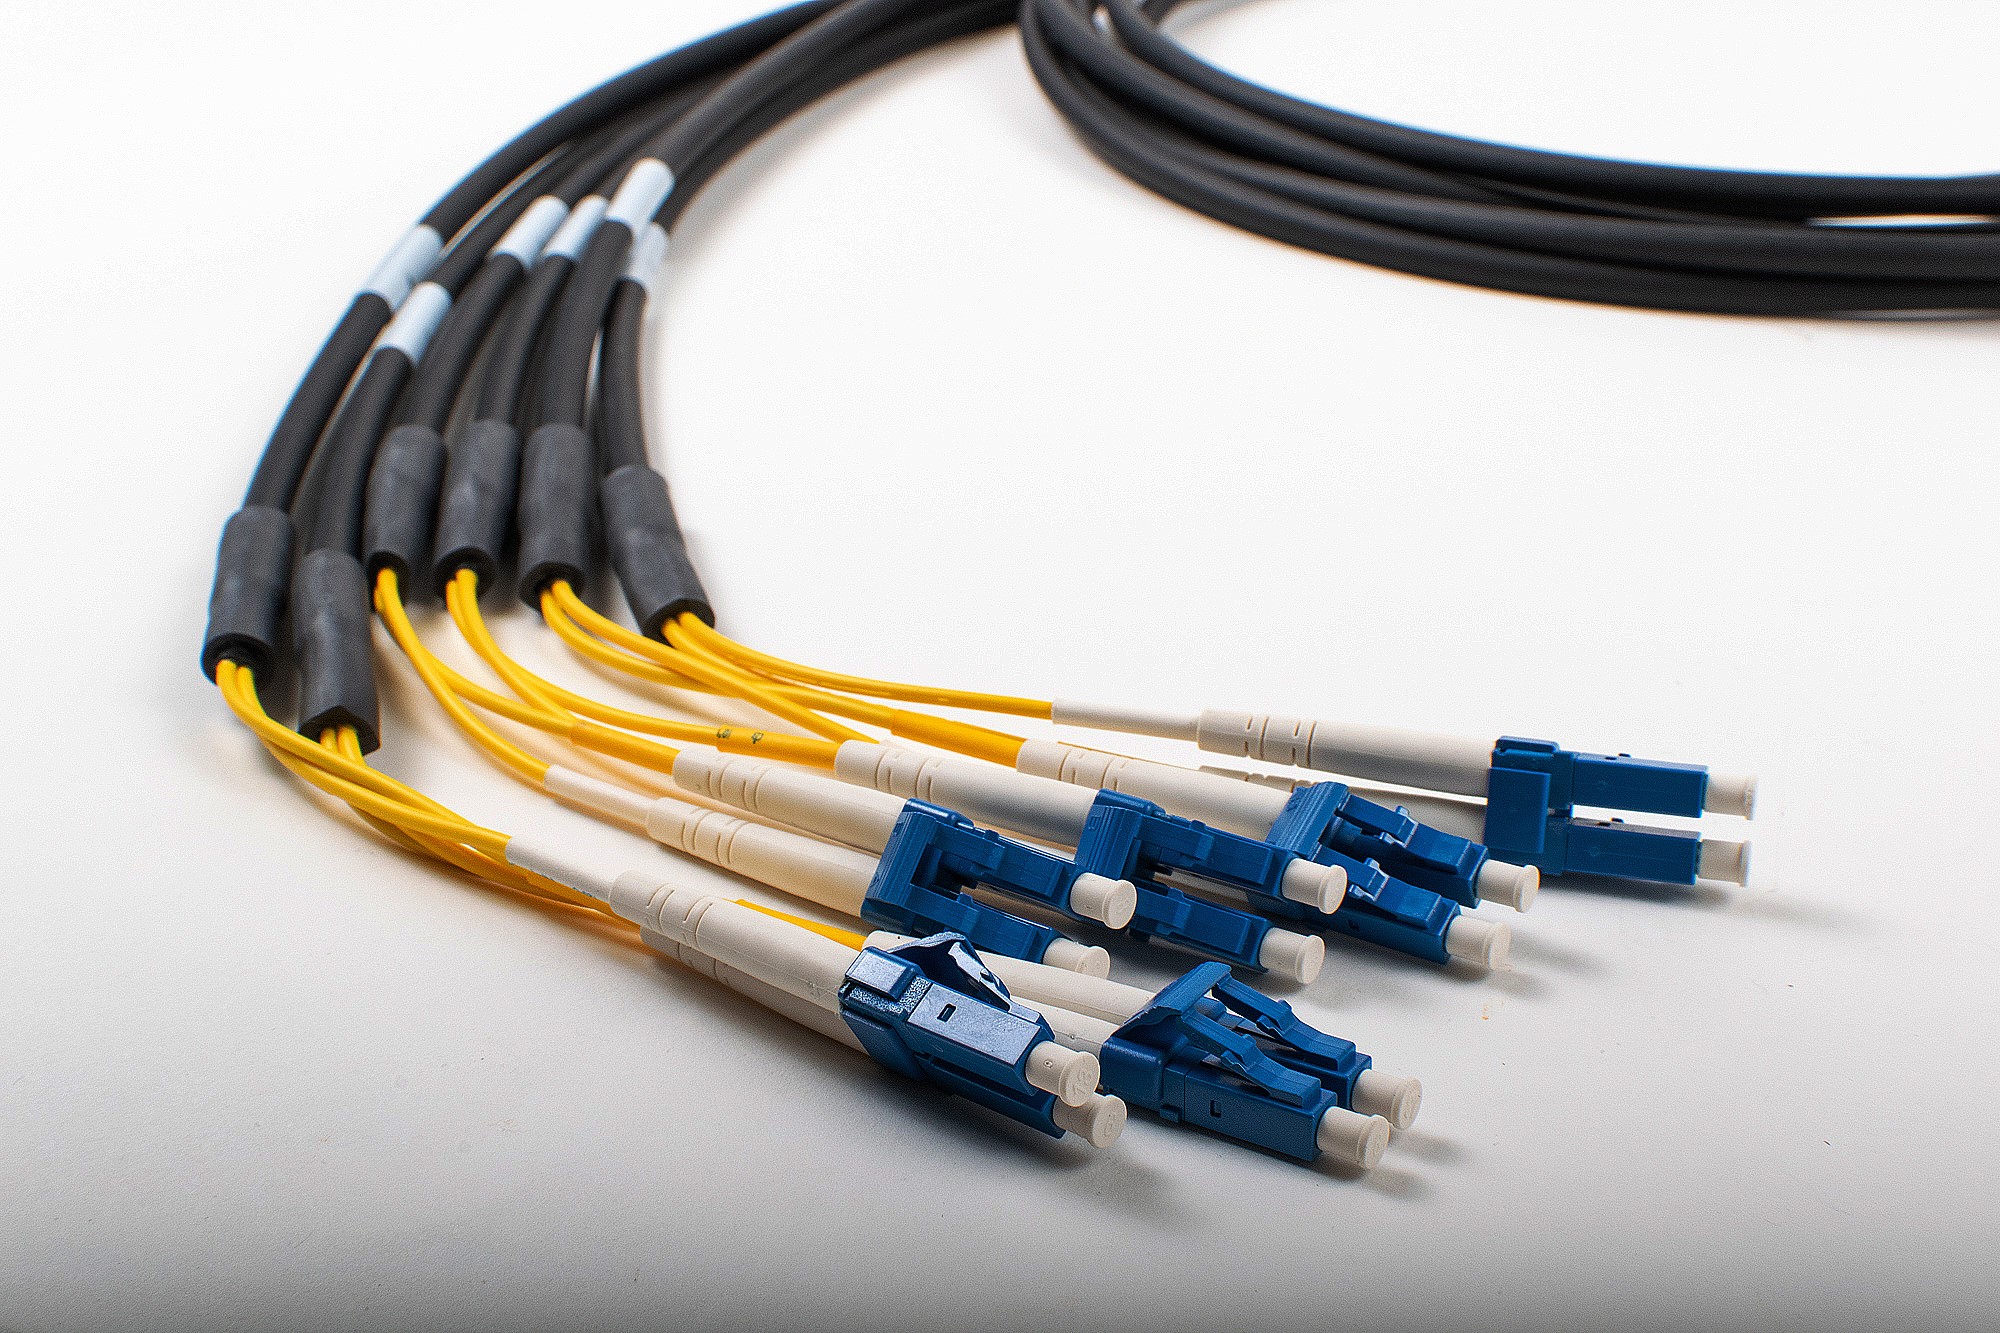 5G cable products from Siemon